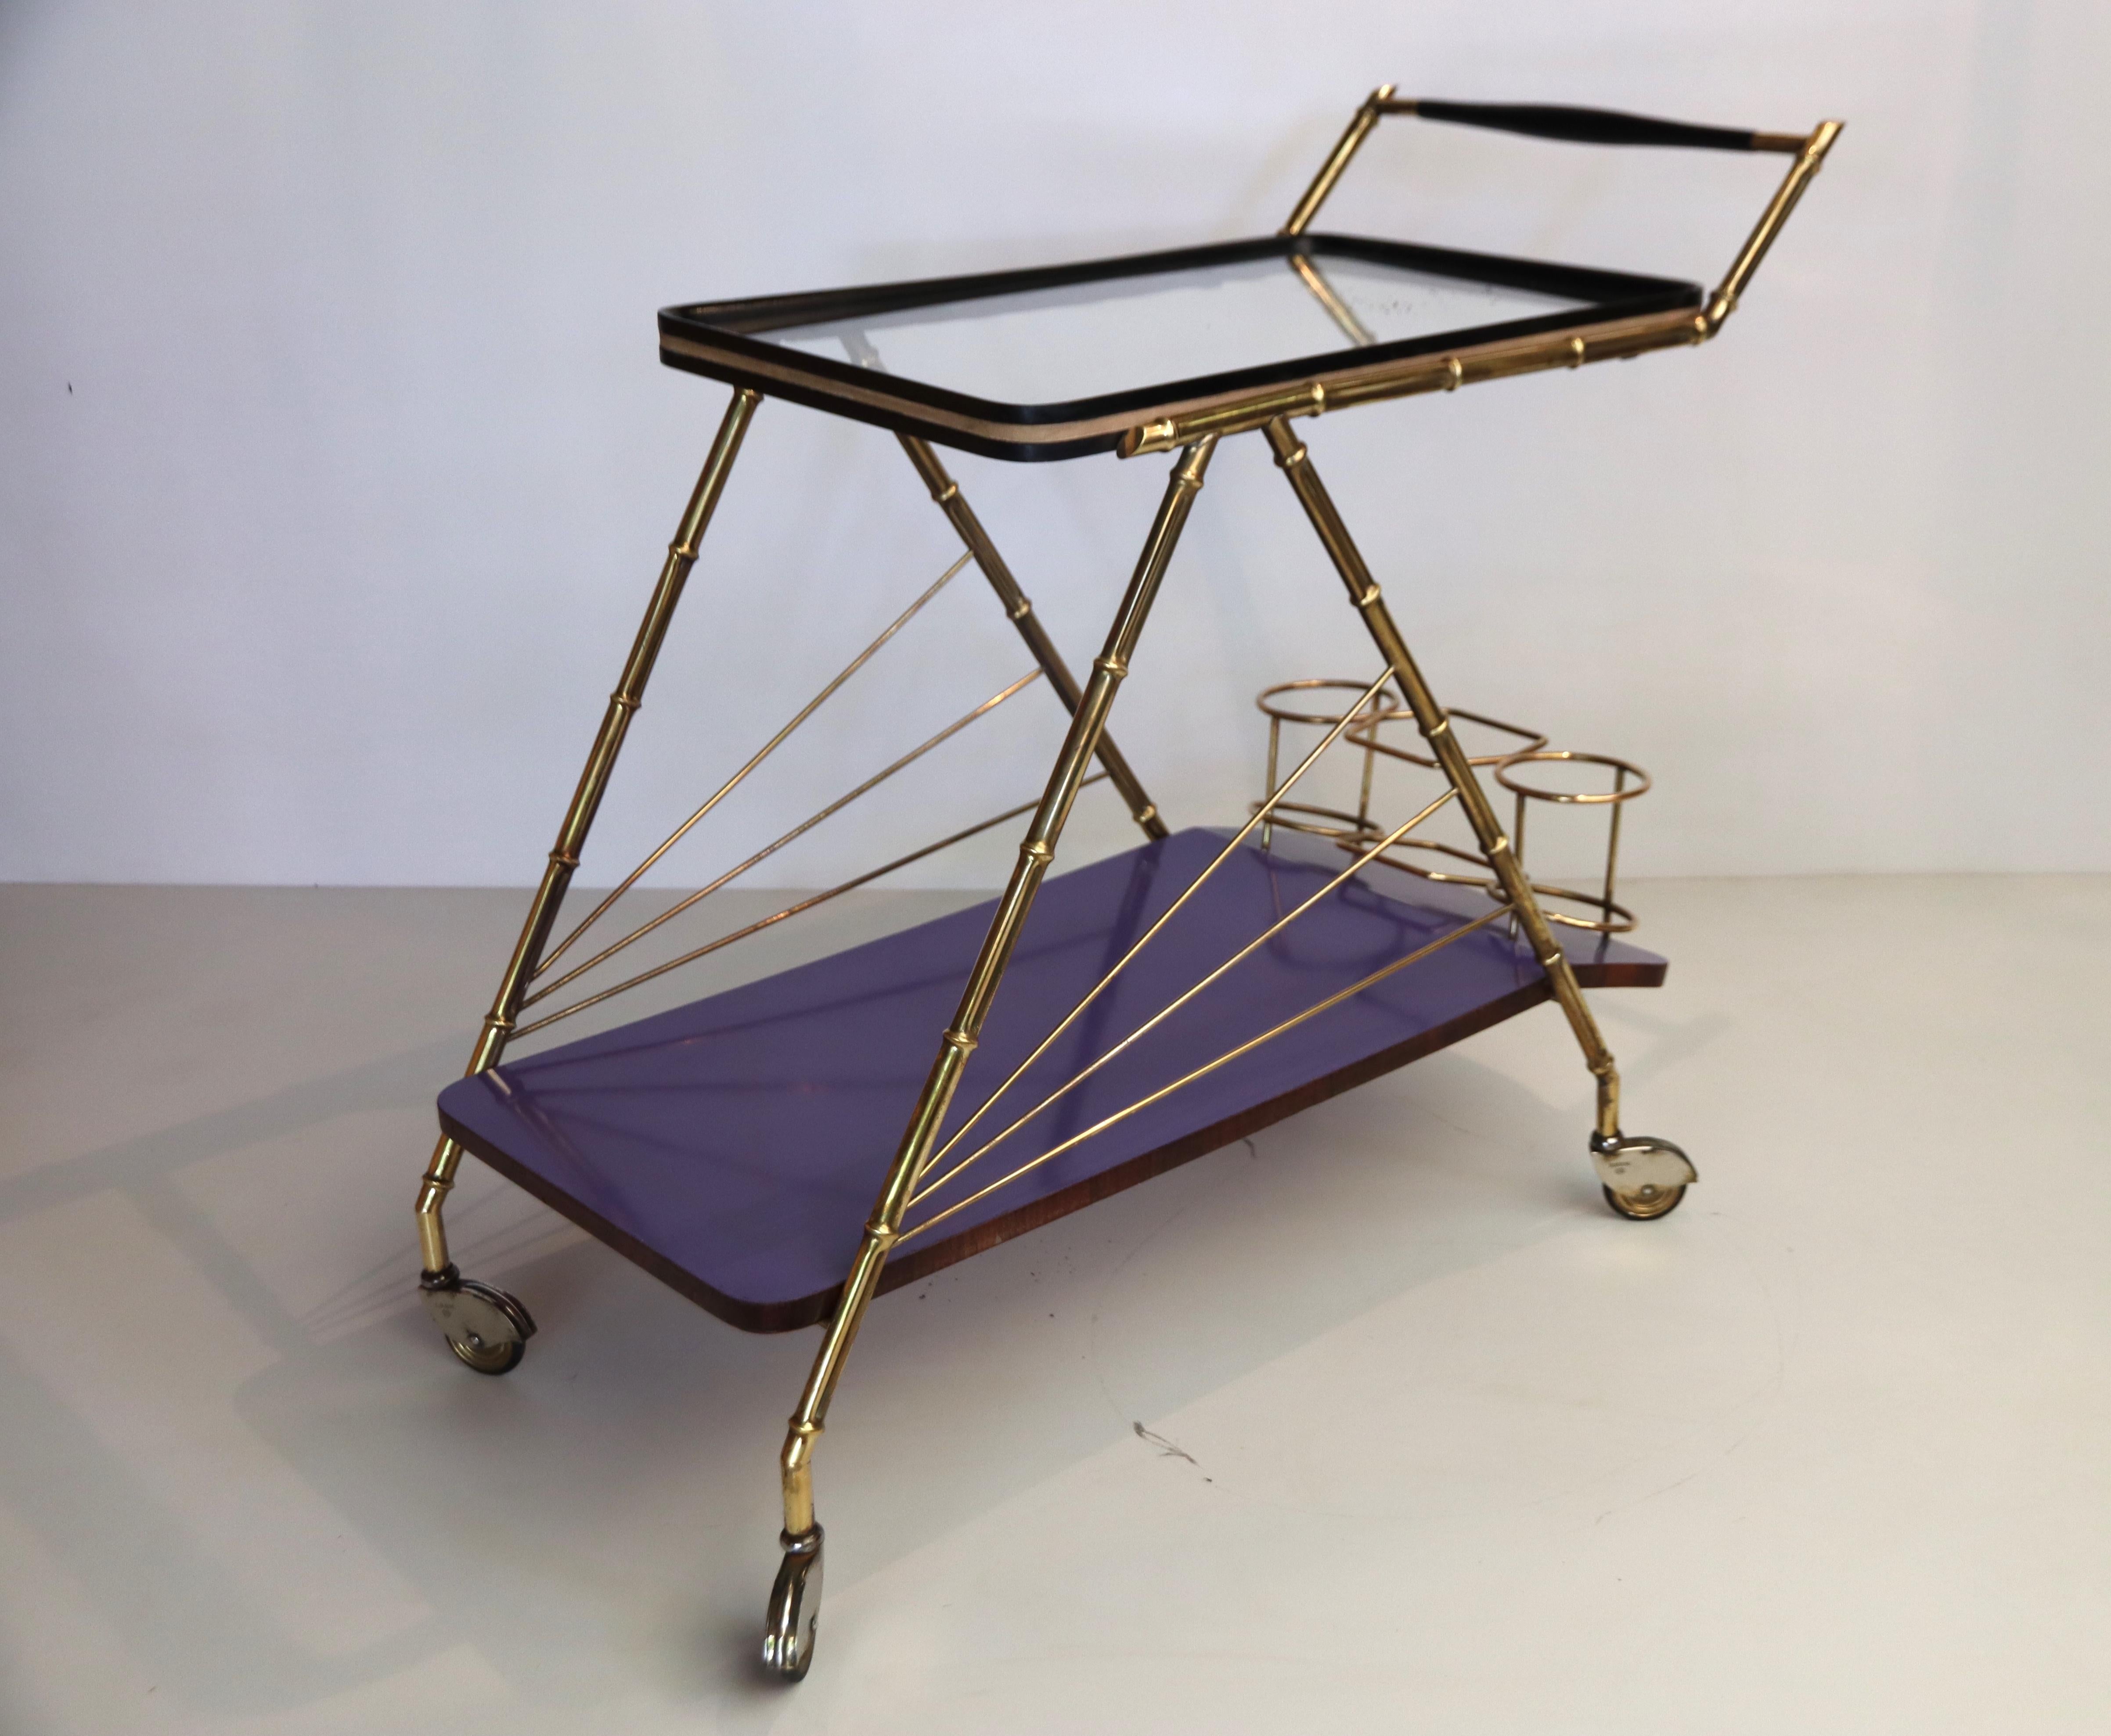 Very unusual elegant and colourful two tiered drinks trolley or bar cart on casters, made of beautiful purple laminated bent wood and copper with the original glass top. 3 brass bottle holders on the bottom tier; in very good condition, alls